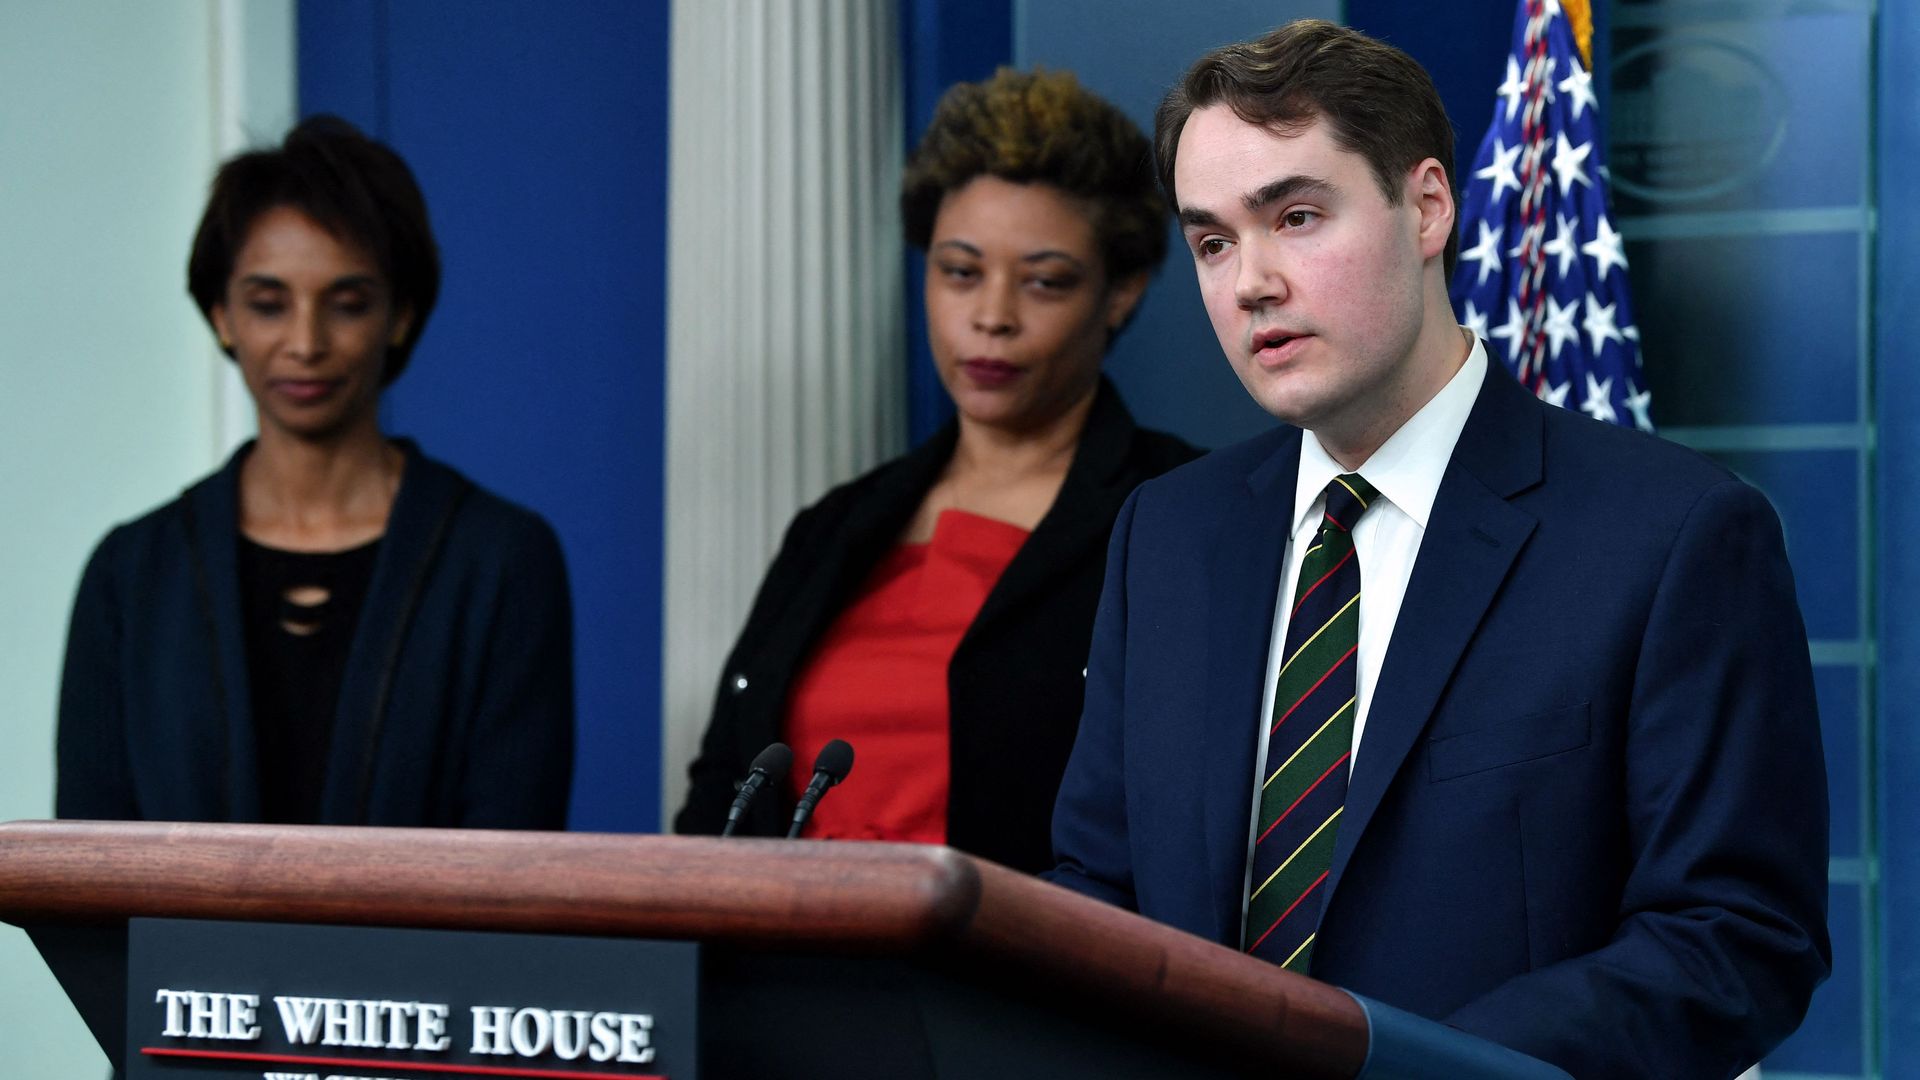 Deputy Press Secretary Andrew Bates is seen delivering the daily White House Press Briefing on Monday.